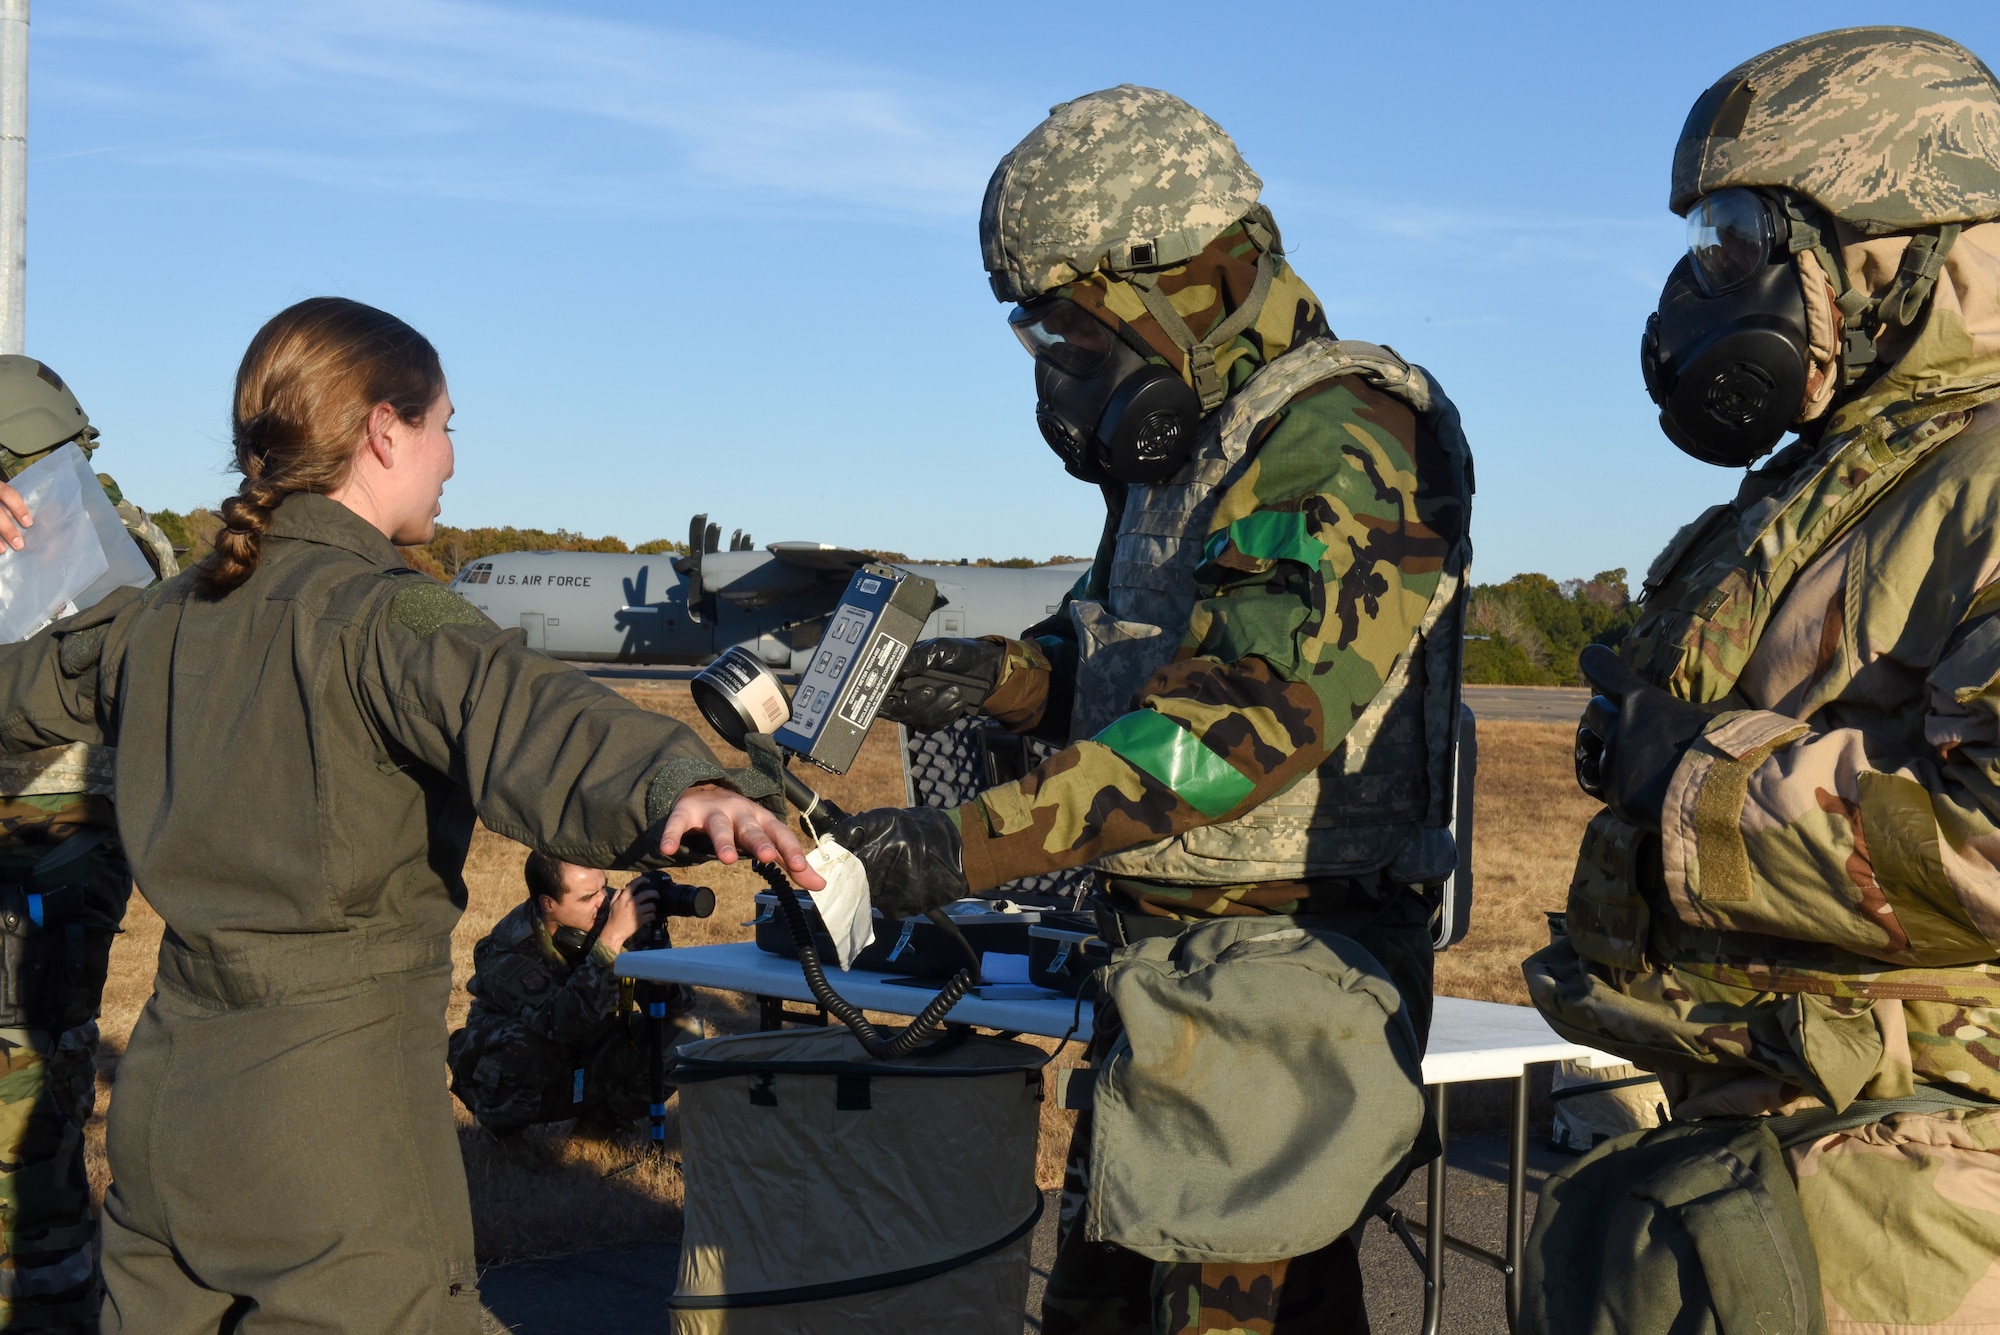 An airman uses a tool to scan for radiation